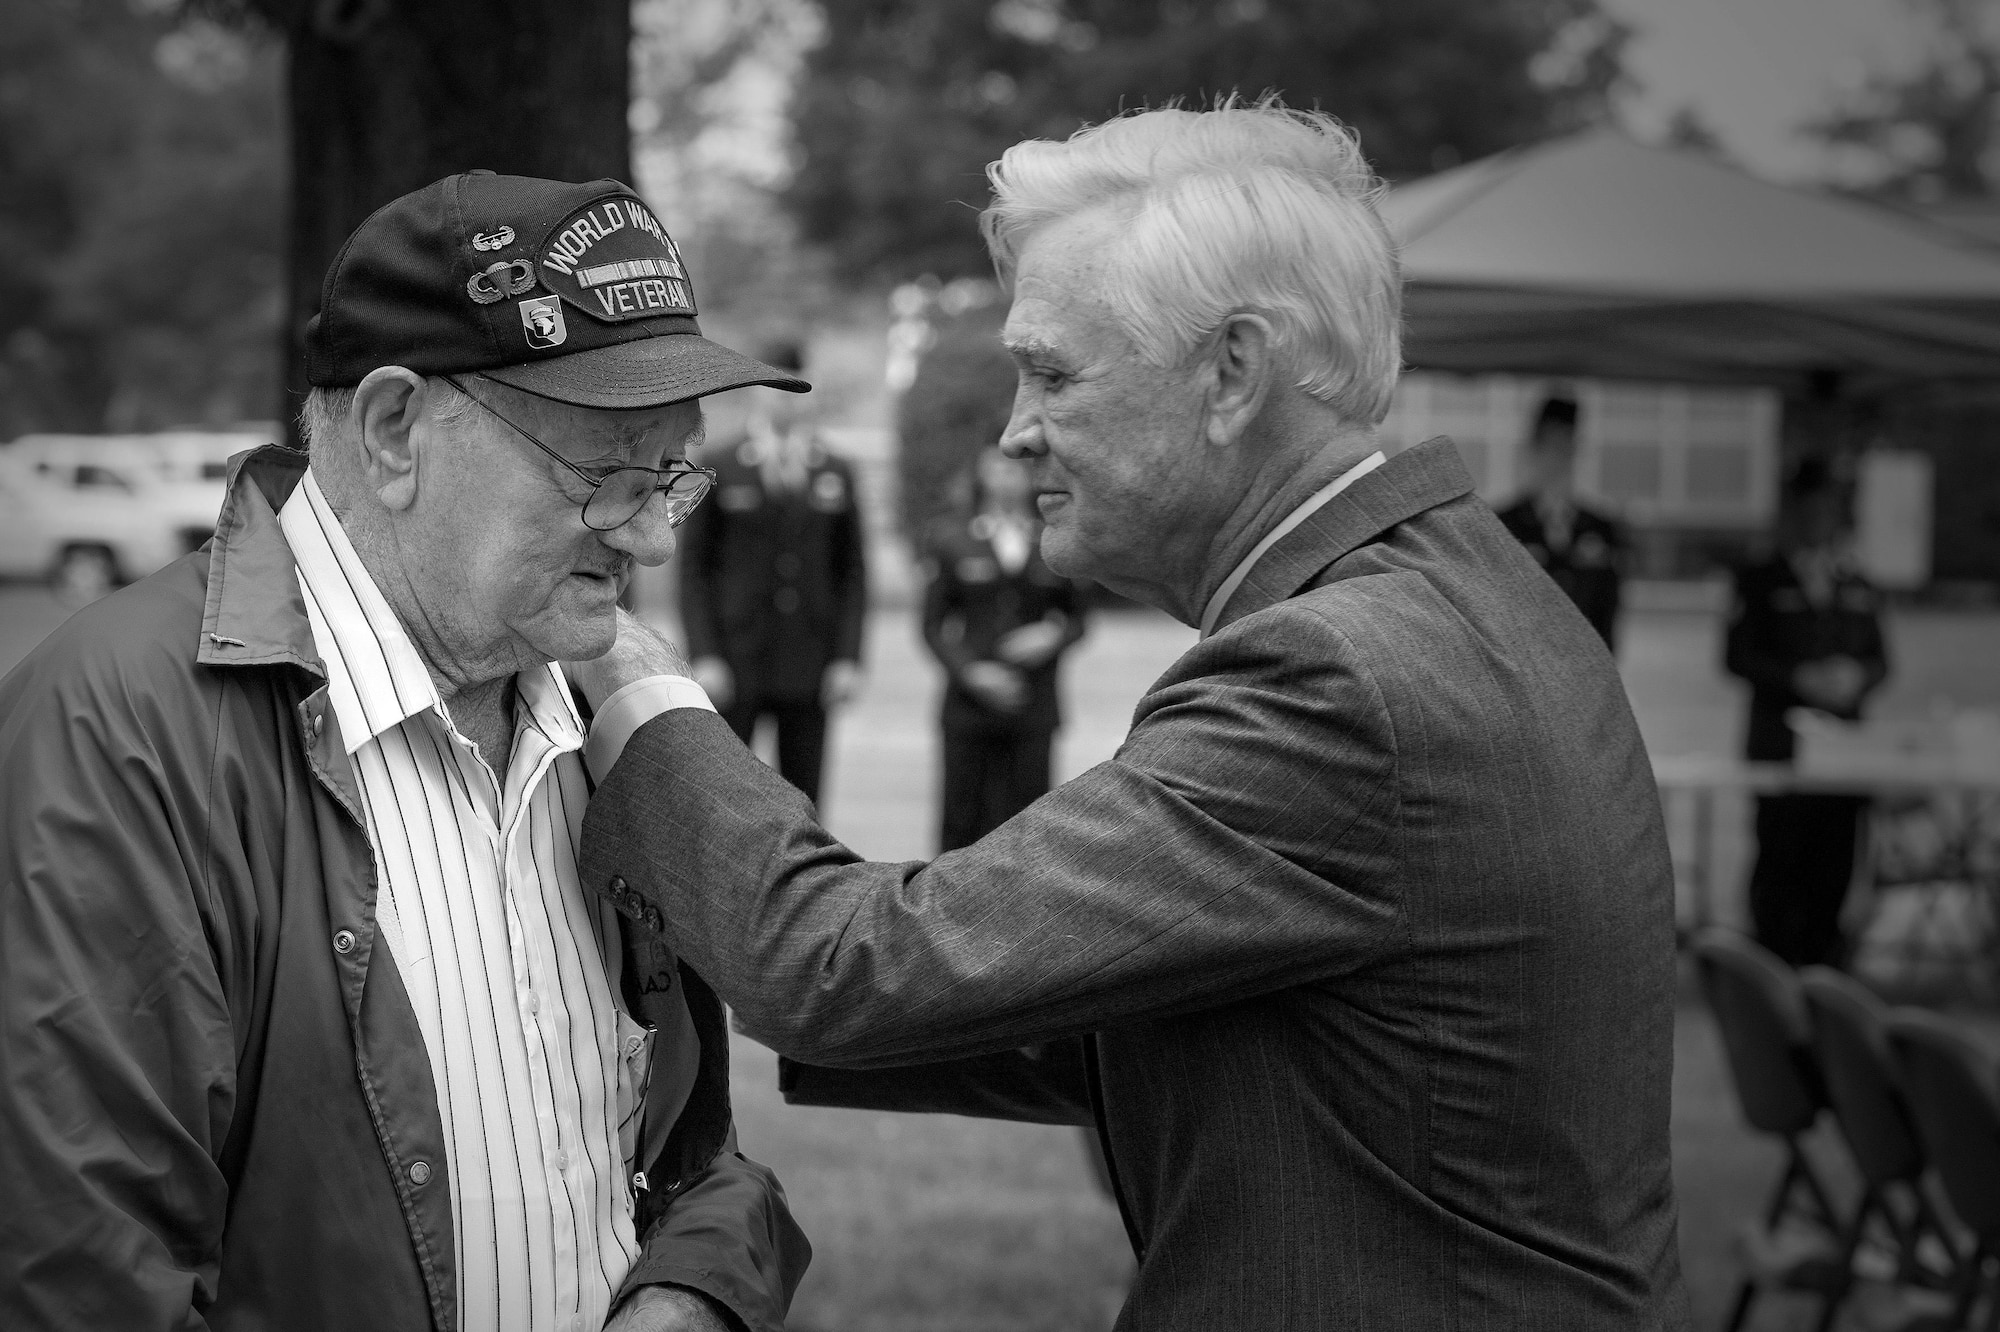 Allen Orndorff, a World War II veteran from the 101st Airborne Division, and Lt. Col. (ret.) Barry Bridger, a six-year POW during the Vietnam War, speak of war stories after a Prisoner of War/Missing in Action closing ceremony at Joint Base Langley-Eustis, Va., Sept. 16, 2016. Although the wars Orndorff and Bridger fought in were both more than 50 years ago, the memories they have still remain. The POW/MIA ceremony was held to pay tribute to all POWs and those missing in action from all wars, past and present. (U.S. Air Force photo by Staff Sgt. Nick Wilson)